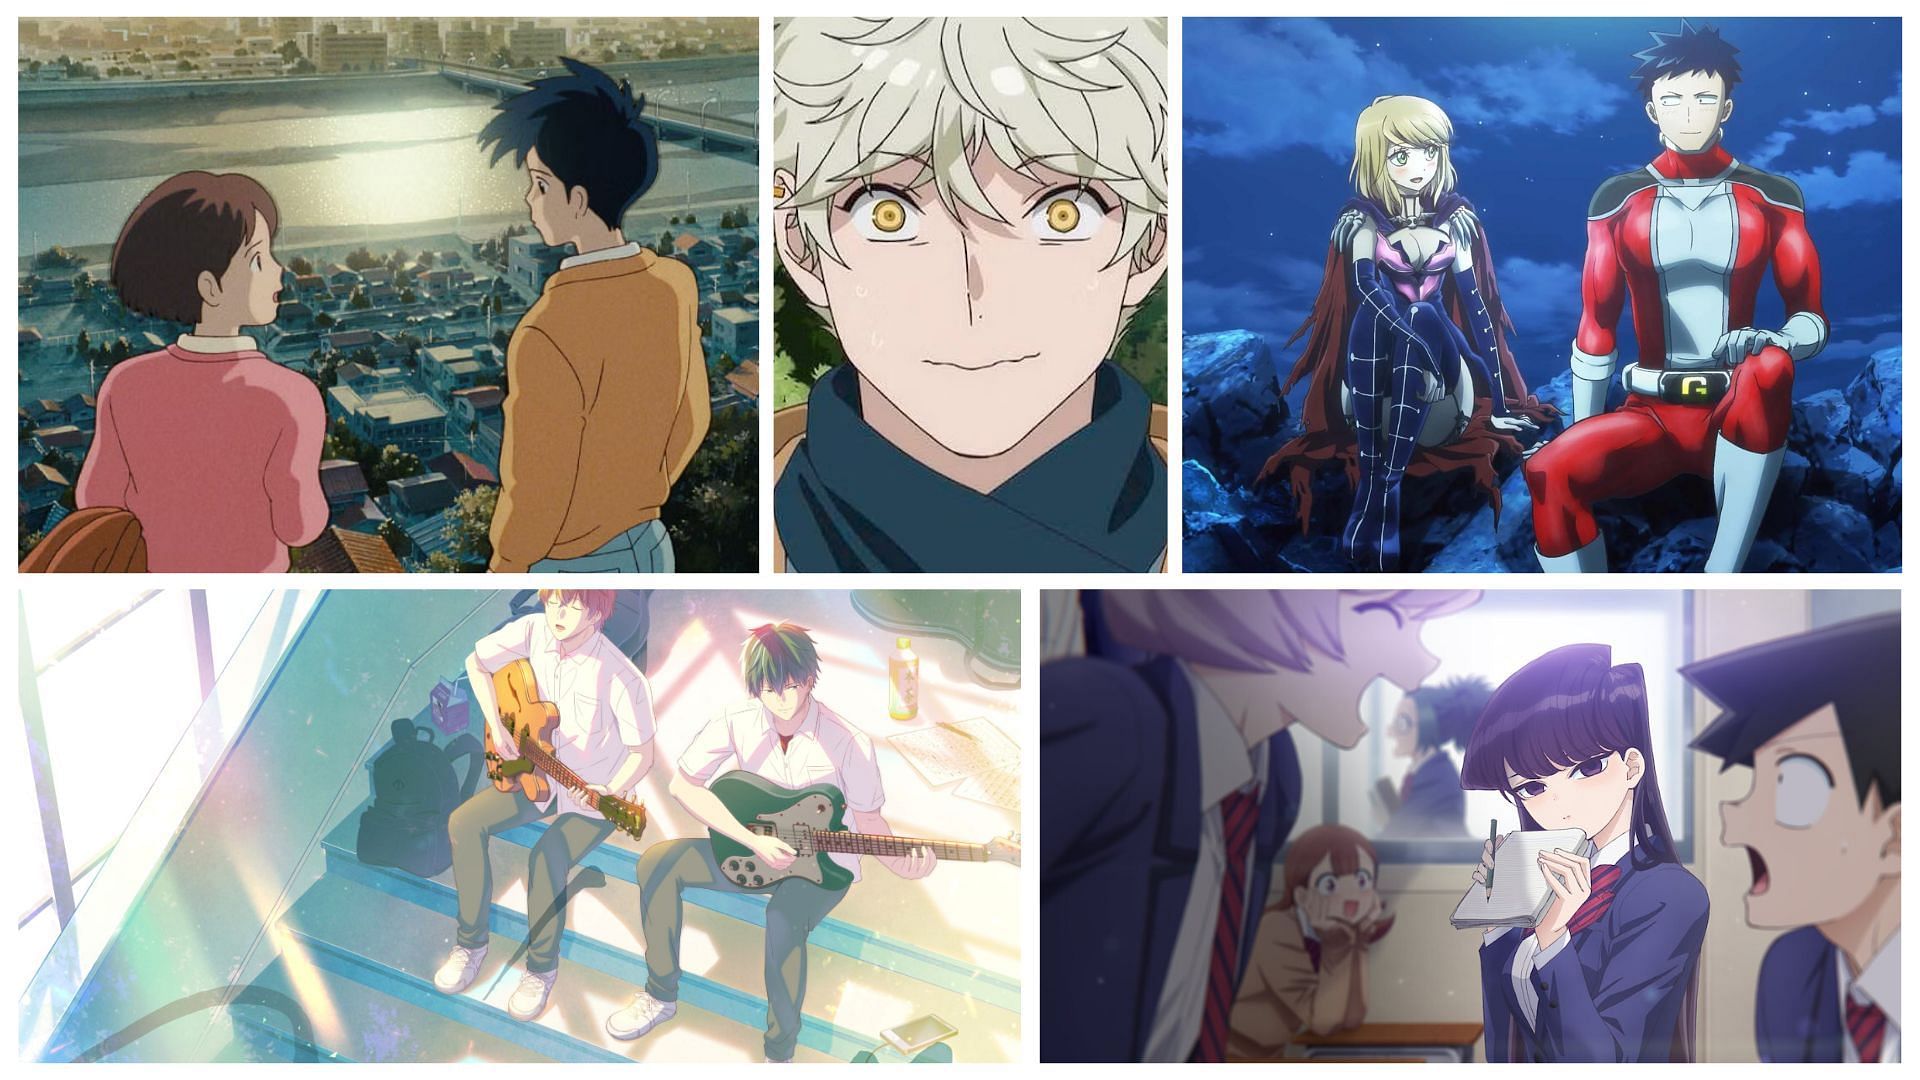 7 Romance Anime Series to Watch If You Want to Feel Kilig